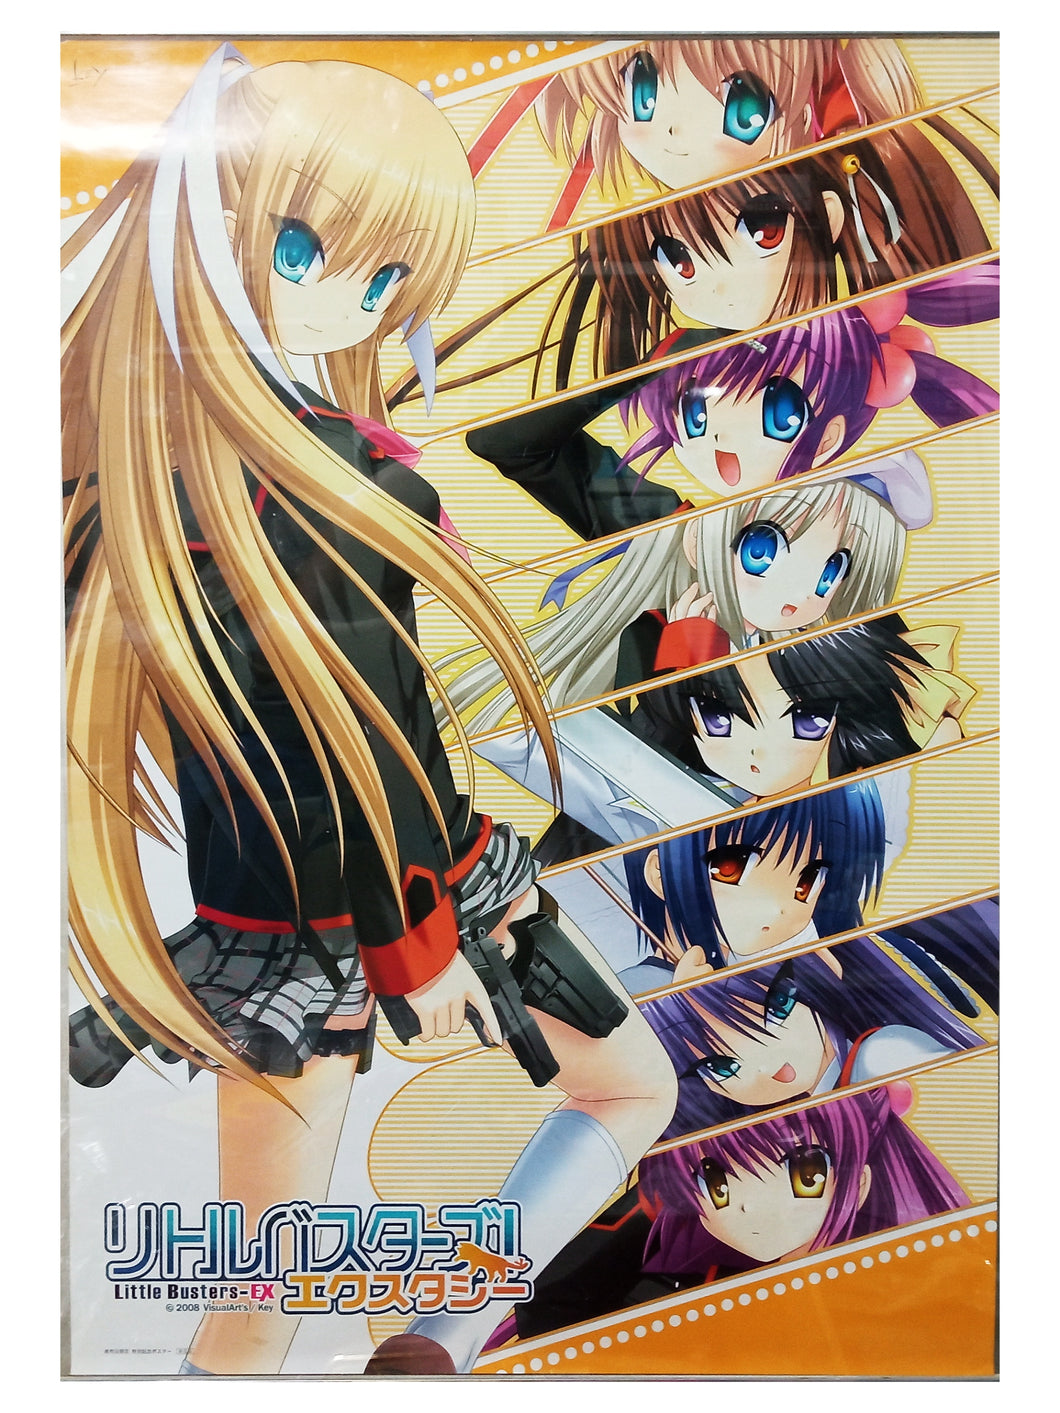 Little Busters: Ecstasy - Saya Tokido - Release Date Limited Special Commemorative B2 Poster